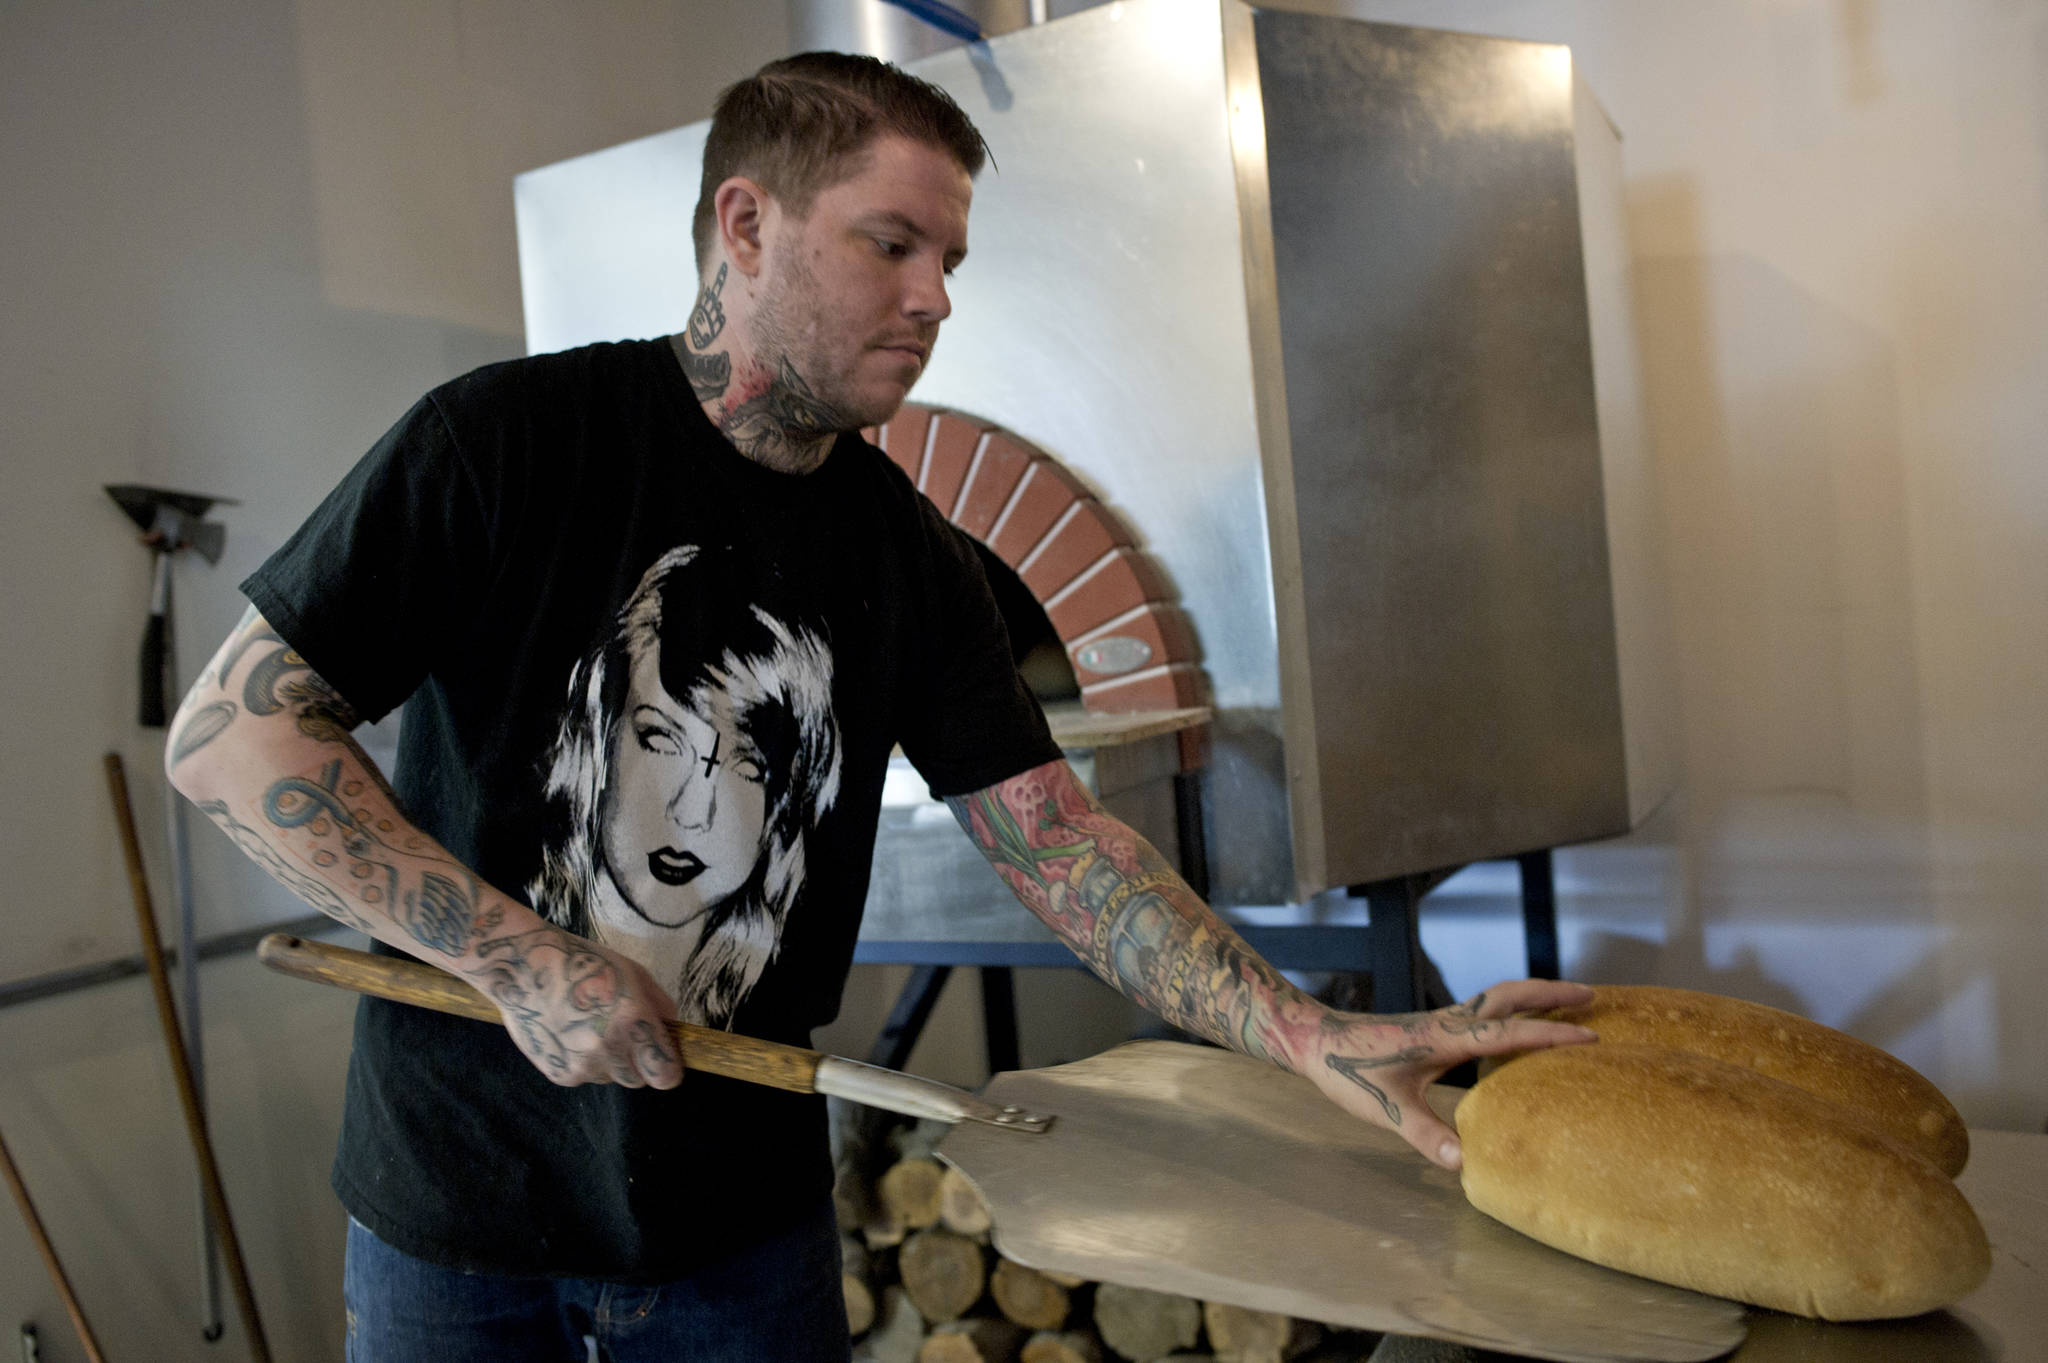 Chef Beau Schooler pulls fresh bread out a wood-fired oven at the new Italian restaurant “In Bocca Al Lupo” downtown in this March 2016 file photo. (Michael Penn | Juneau Empire File)